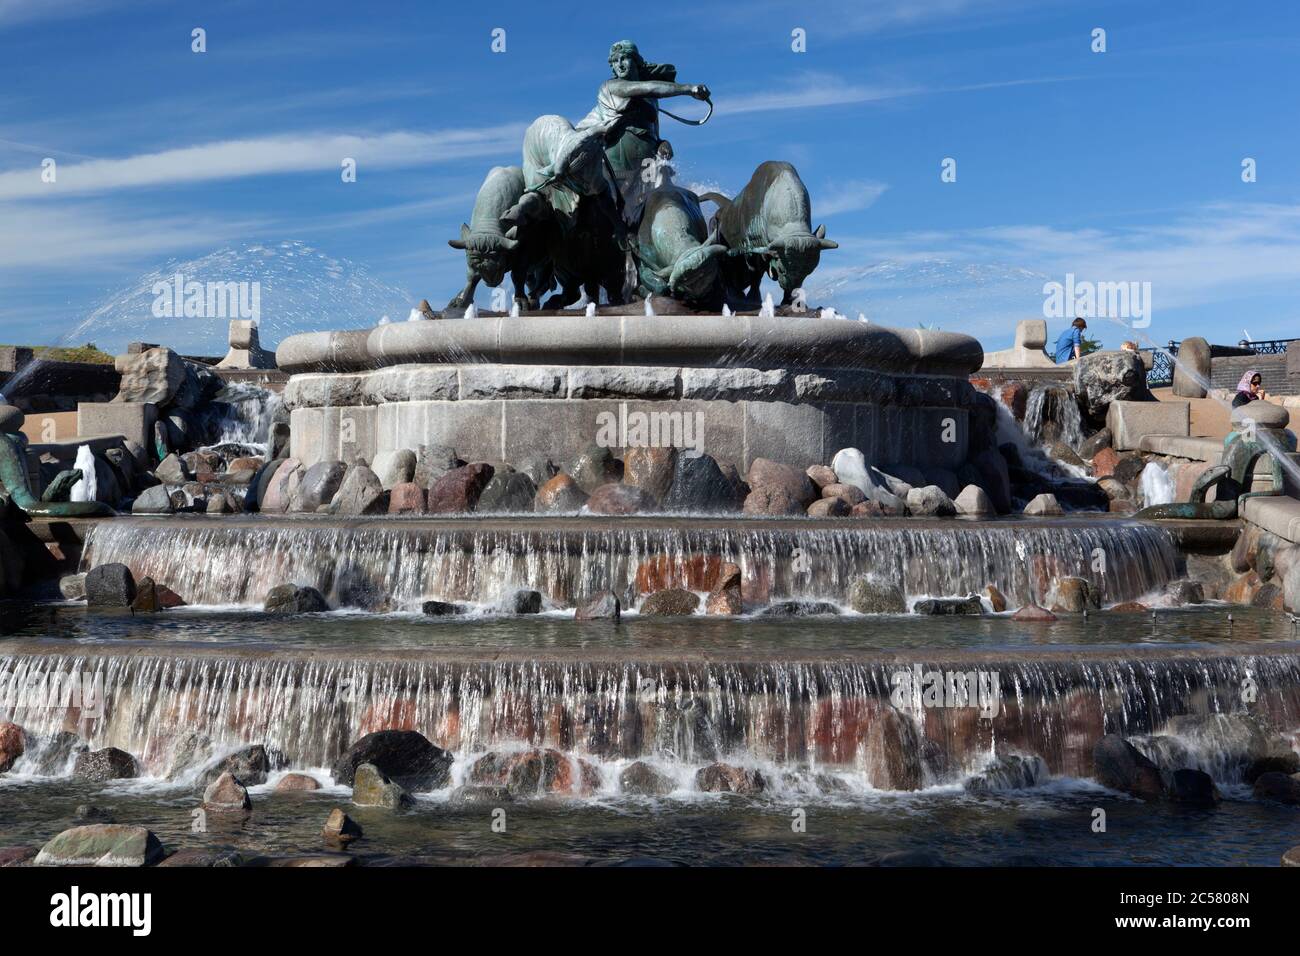 Gefionspringvandet. Fountain with bronze statue of the goddess Gefion ploughing land to create the island of Zealand Stock Photo